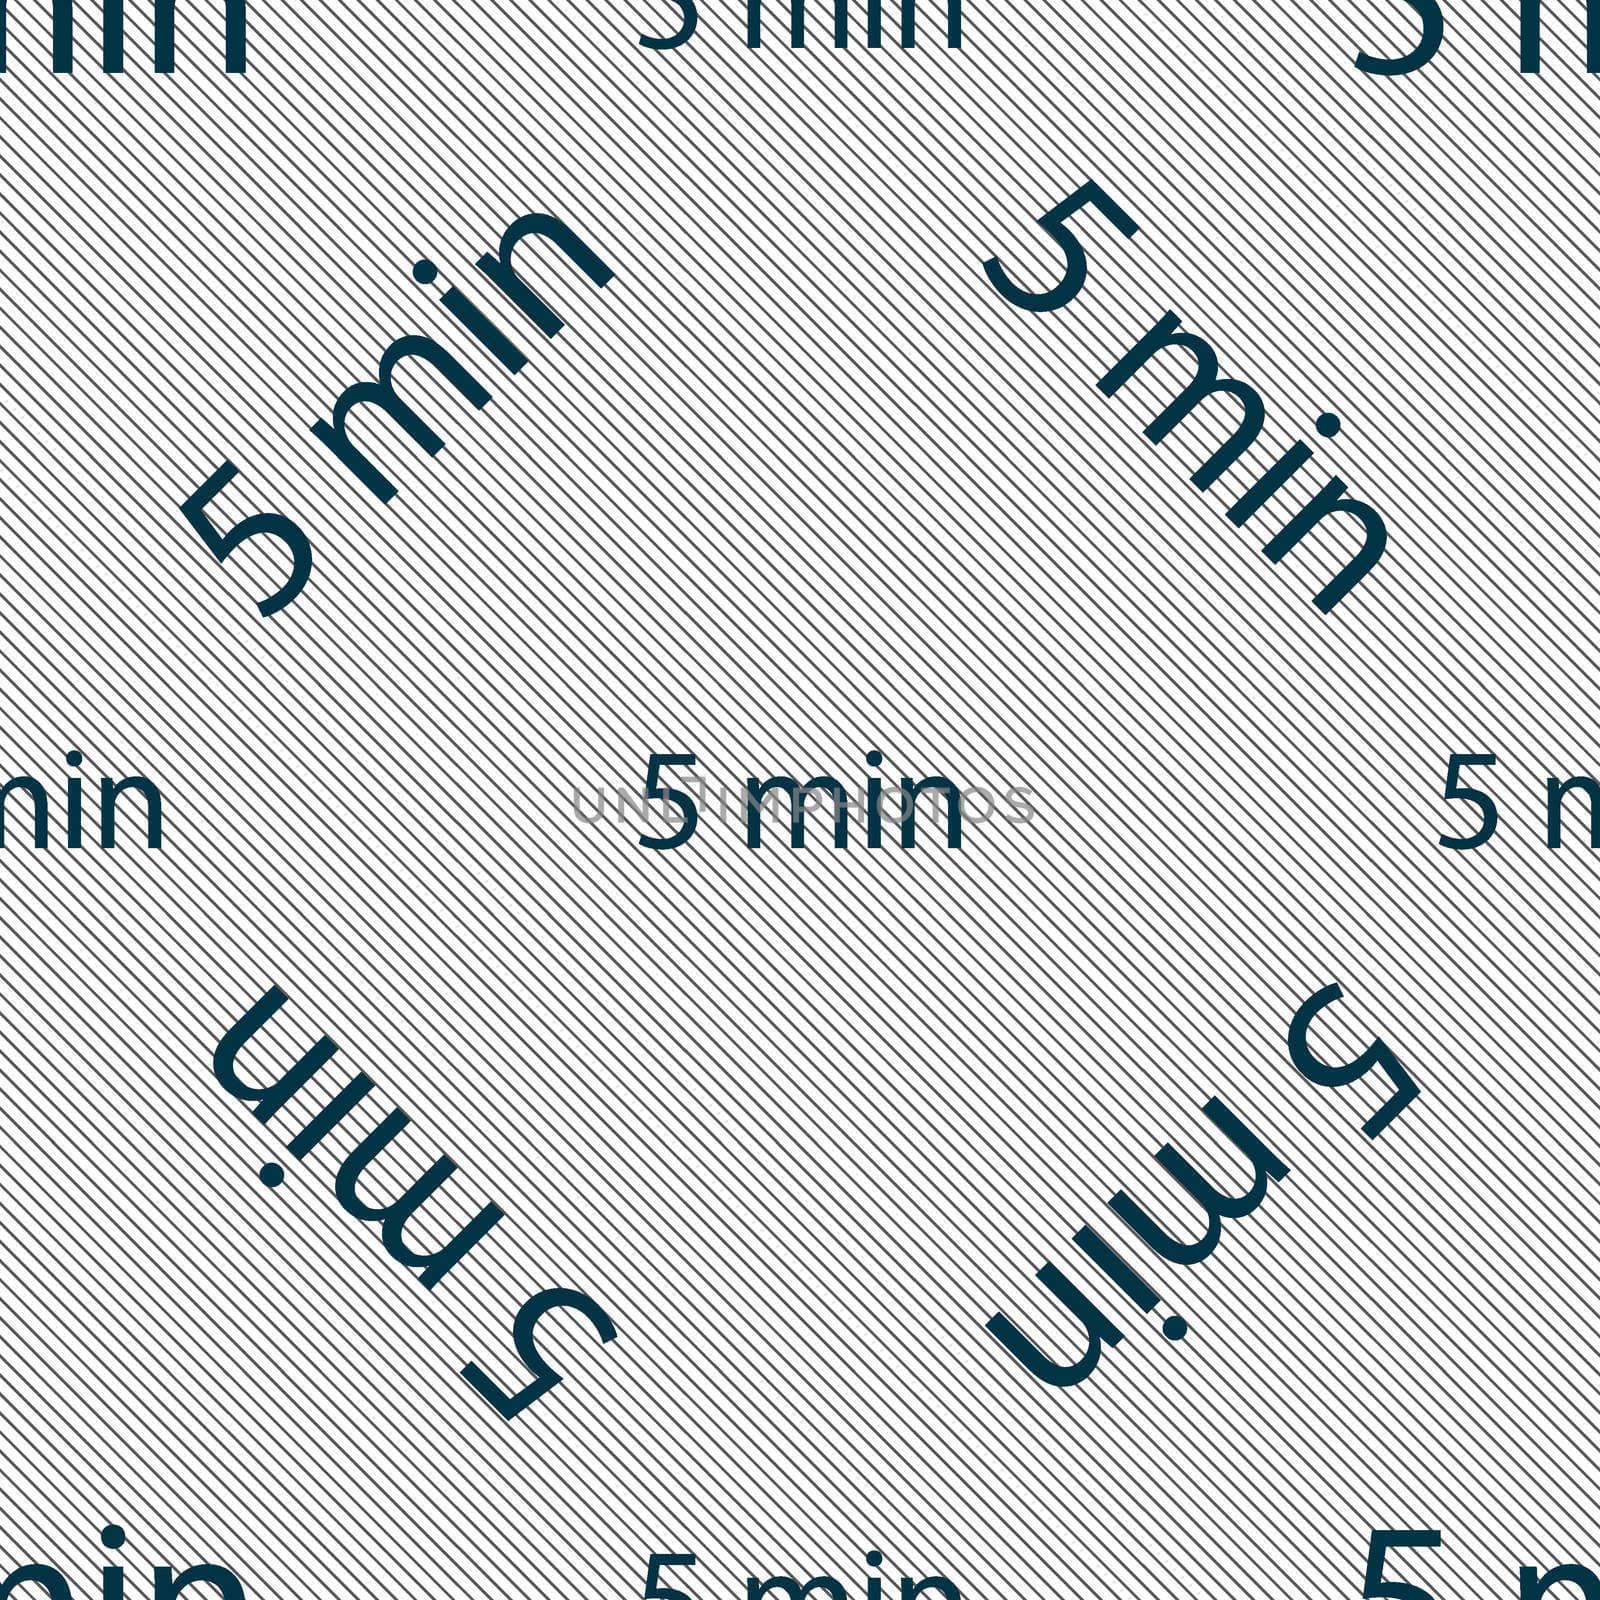 5 minutes sign icon. Seamless pattern with geometric texture. illustration